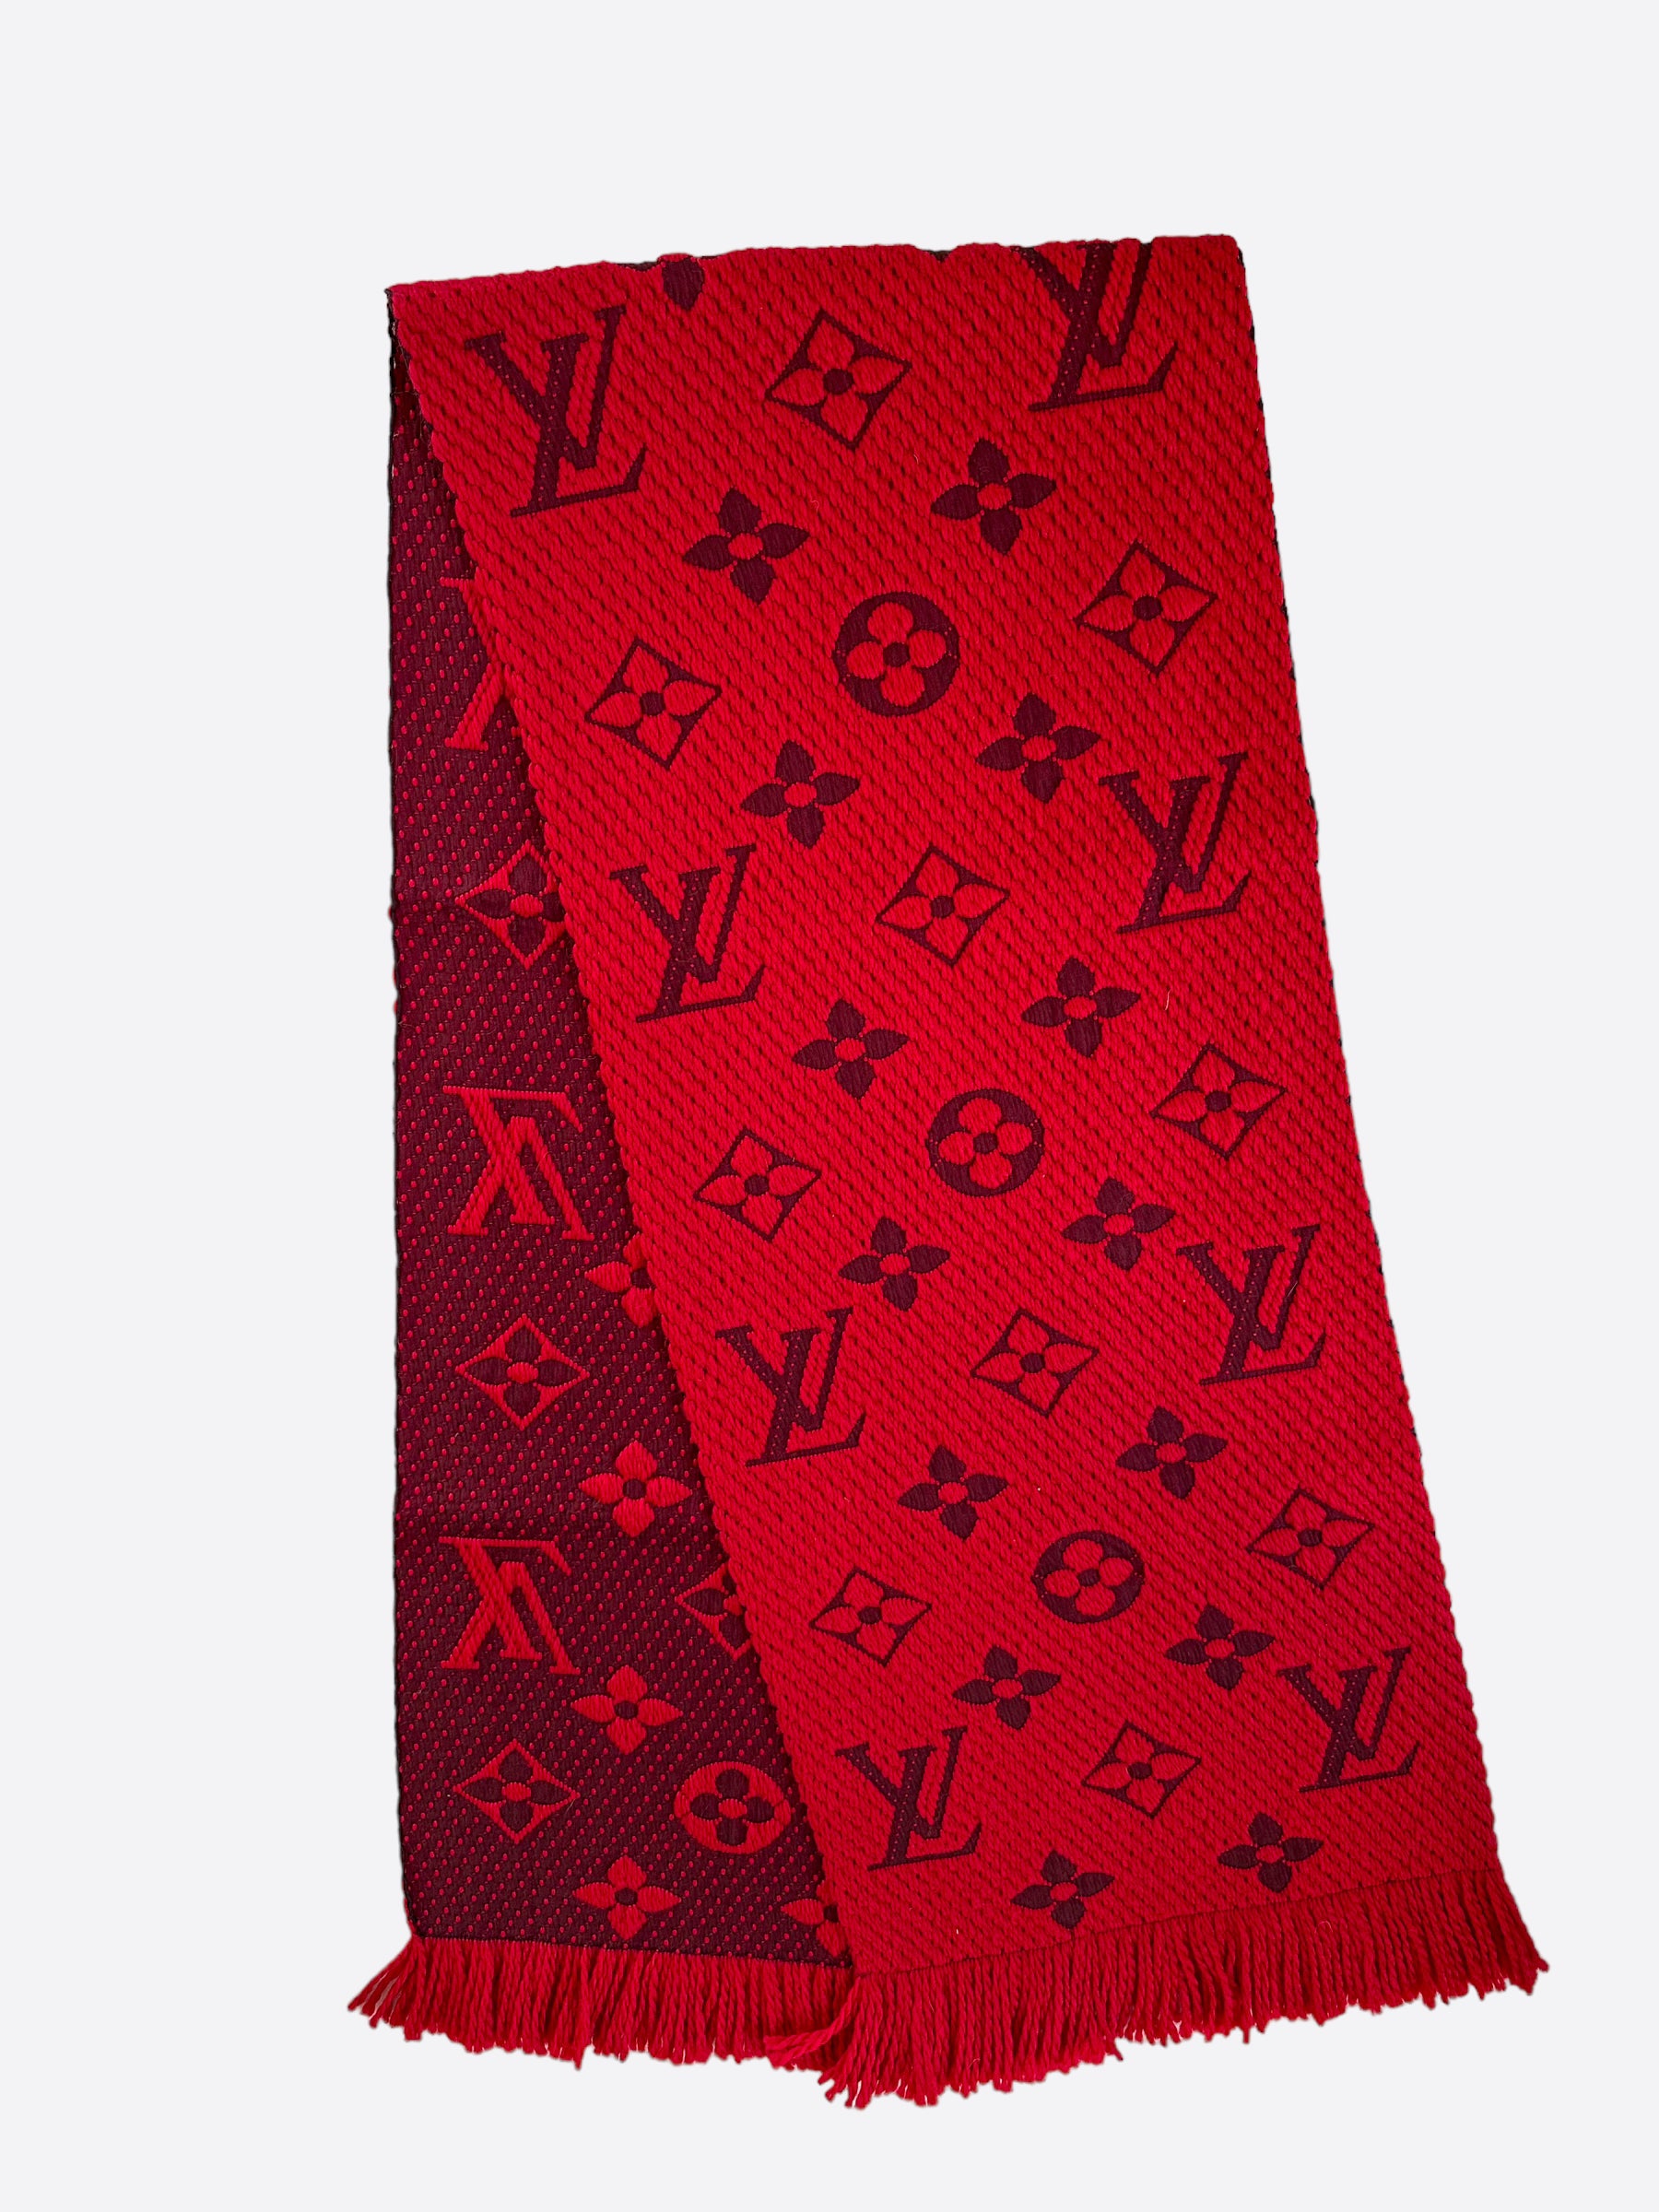 Louis Vuitton Monogram Logomania Scarf 2018-19FW, Red, * Inventory Confirmation Required